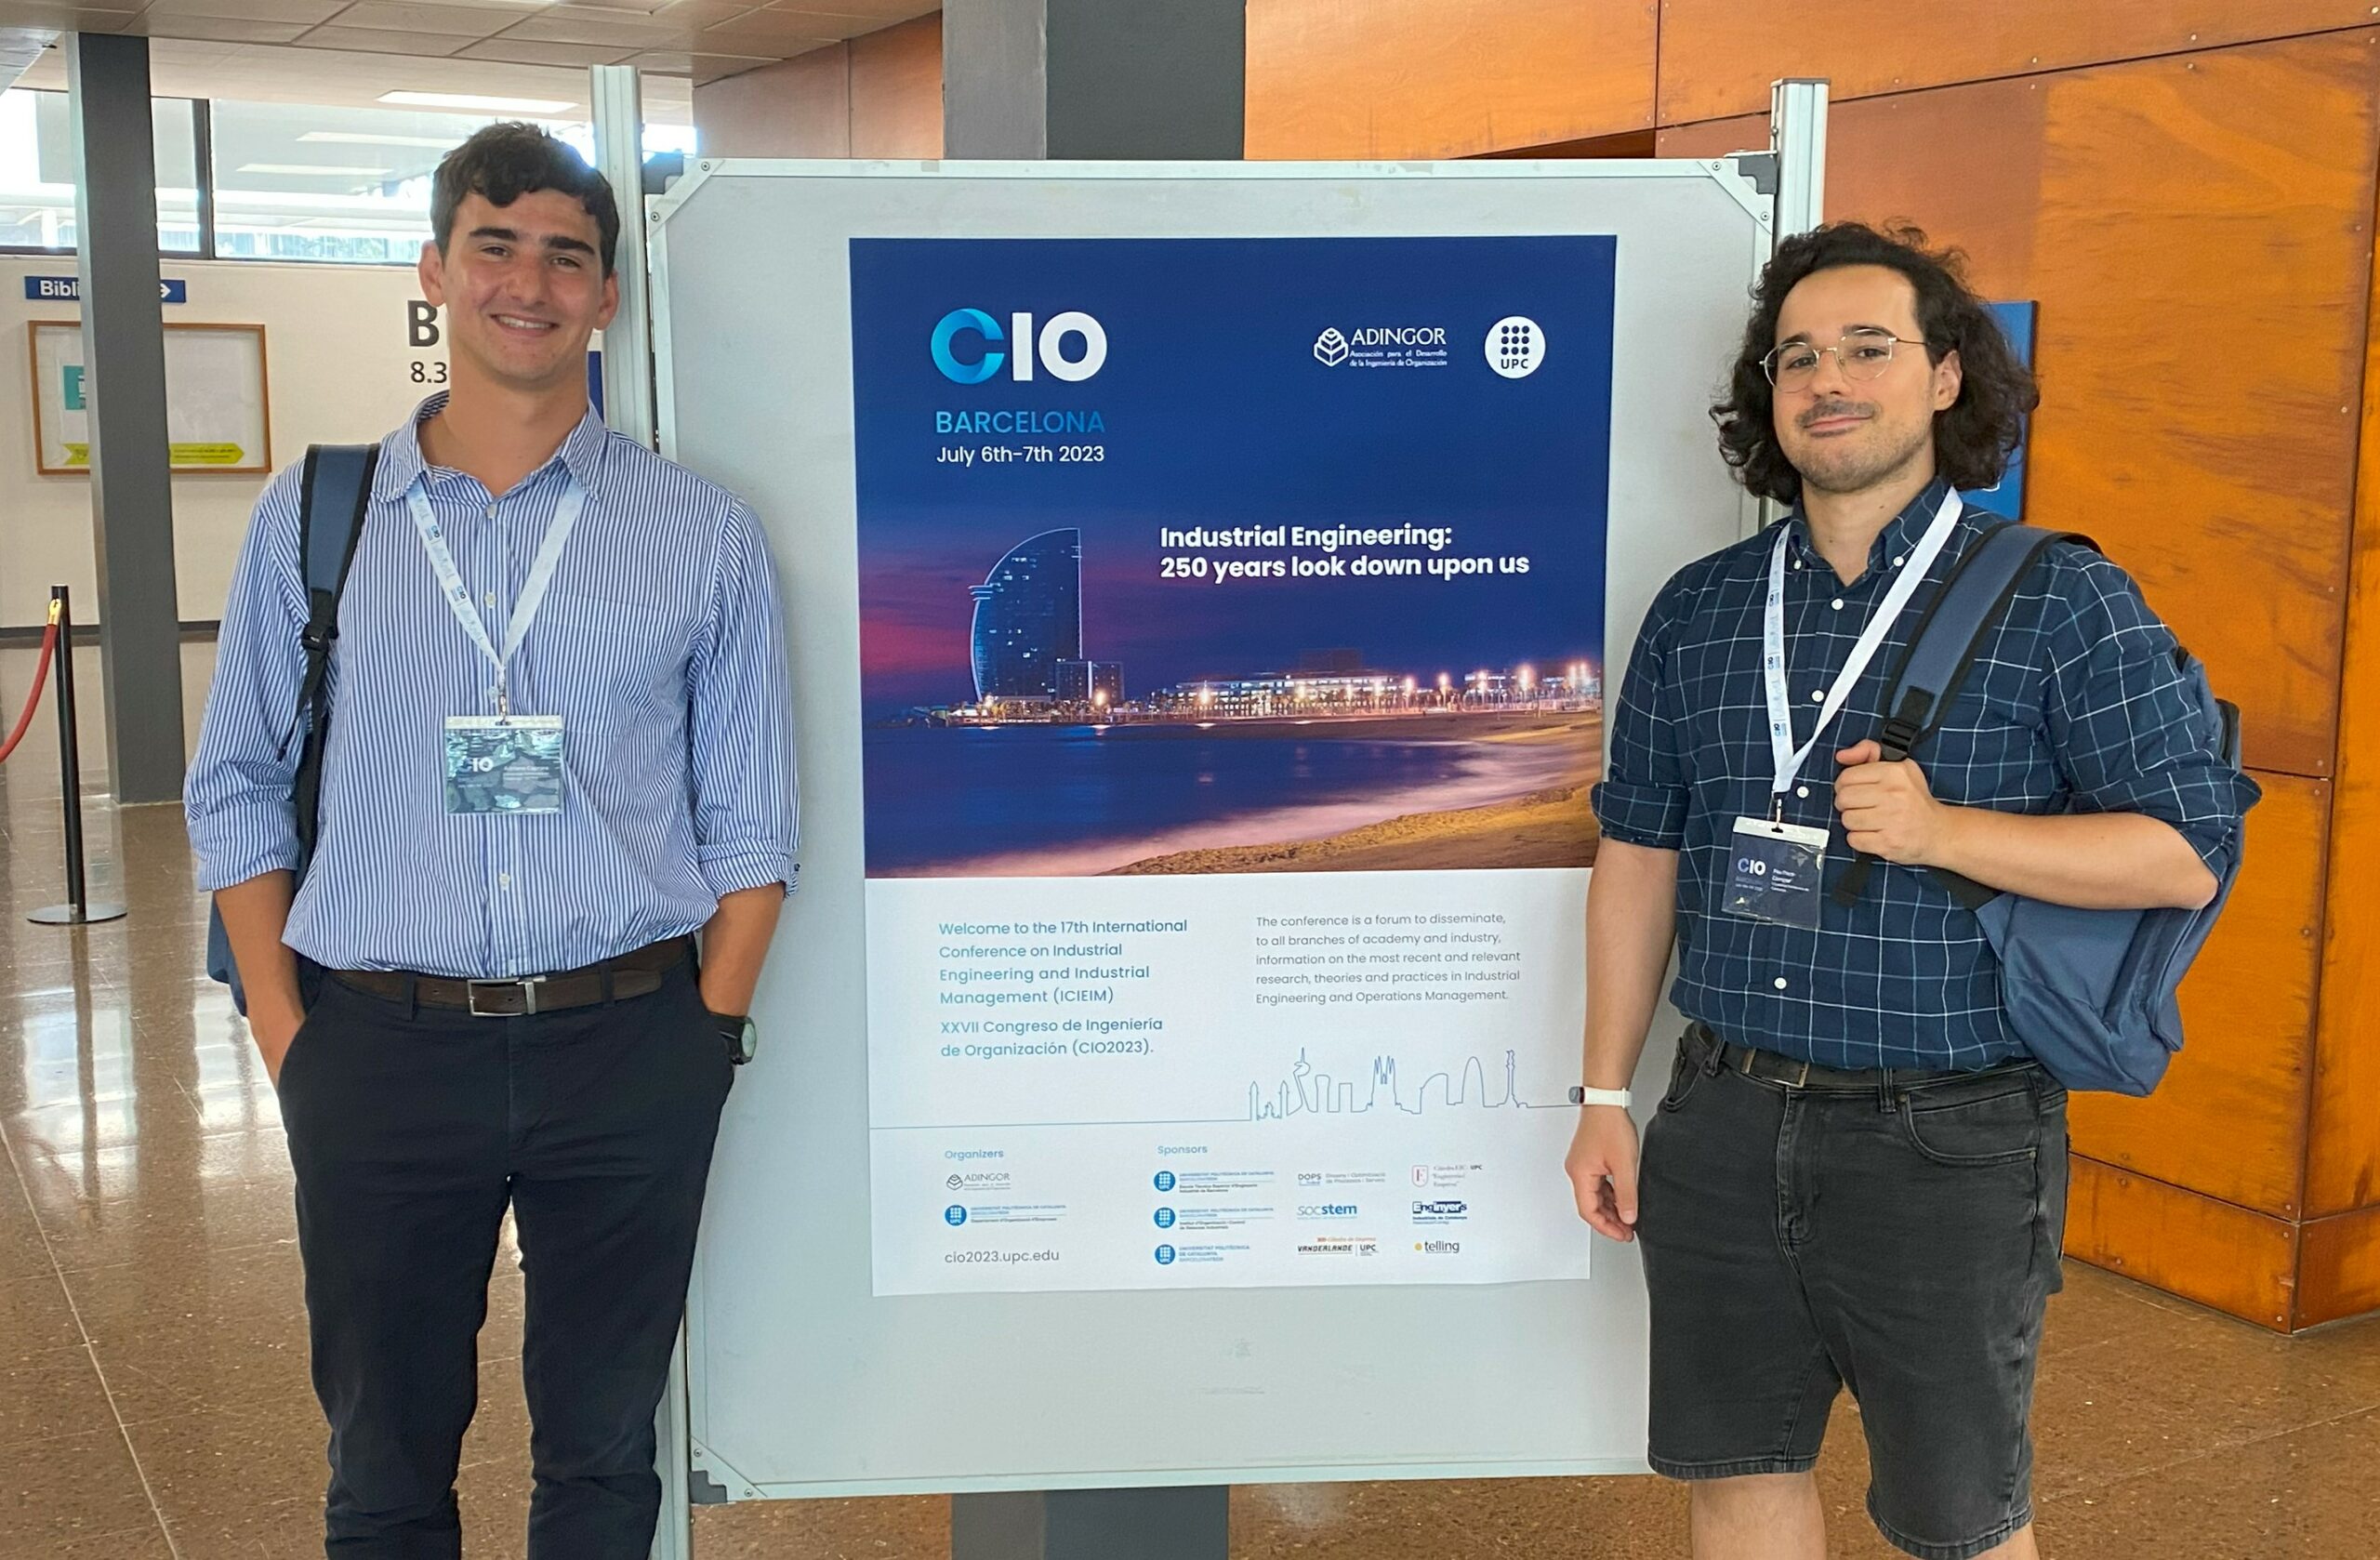 Partner UPC presents two papers based on FLEX4FACT findings at the CIO2023 in Barcelona